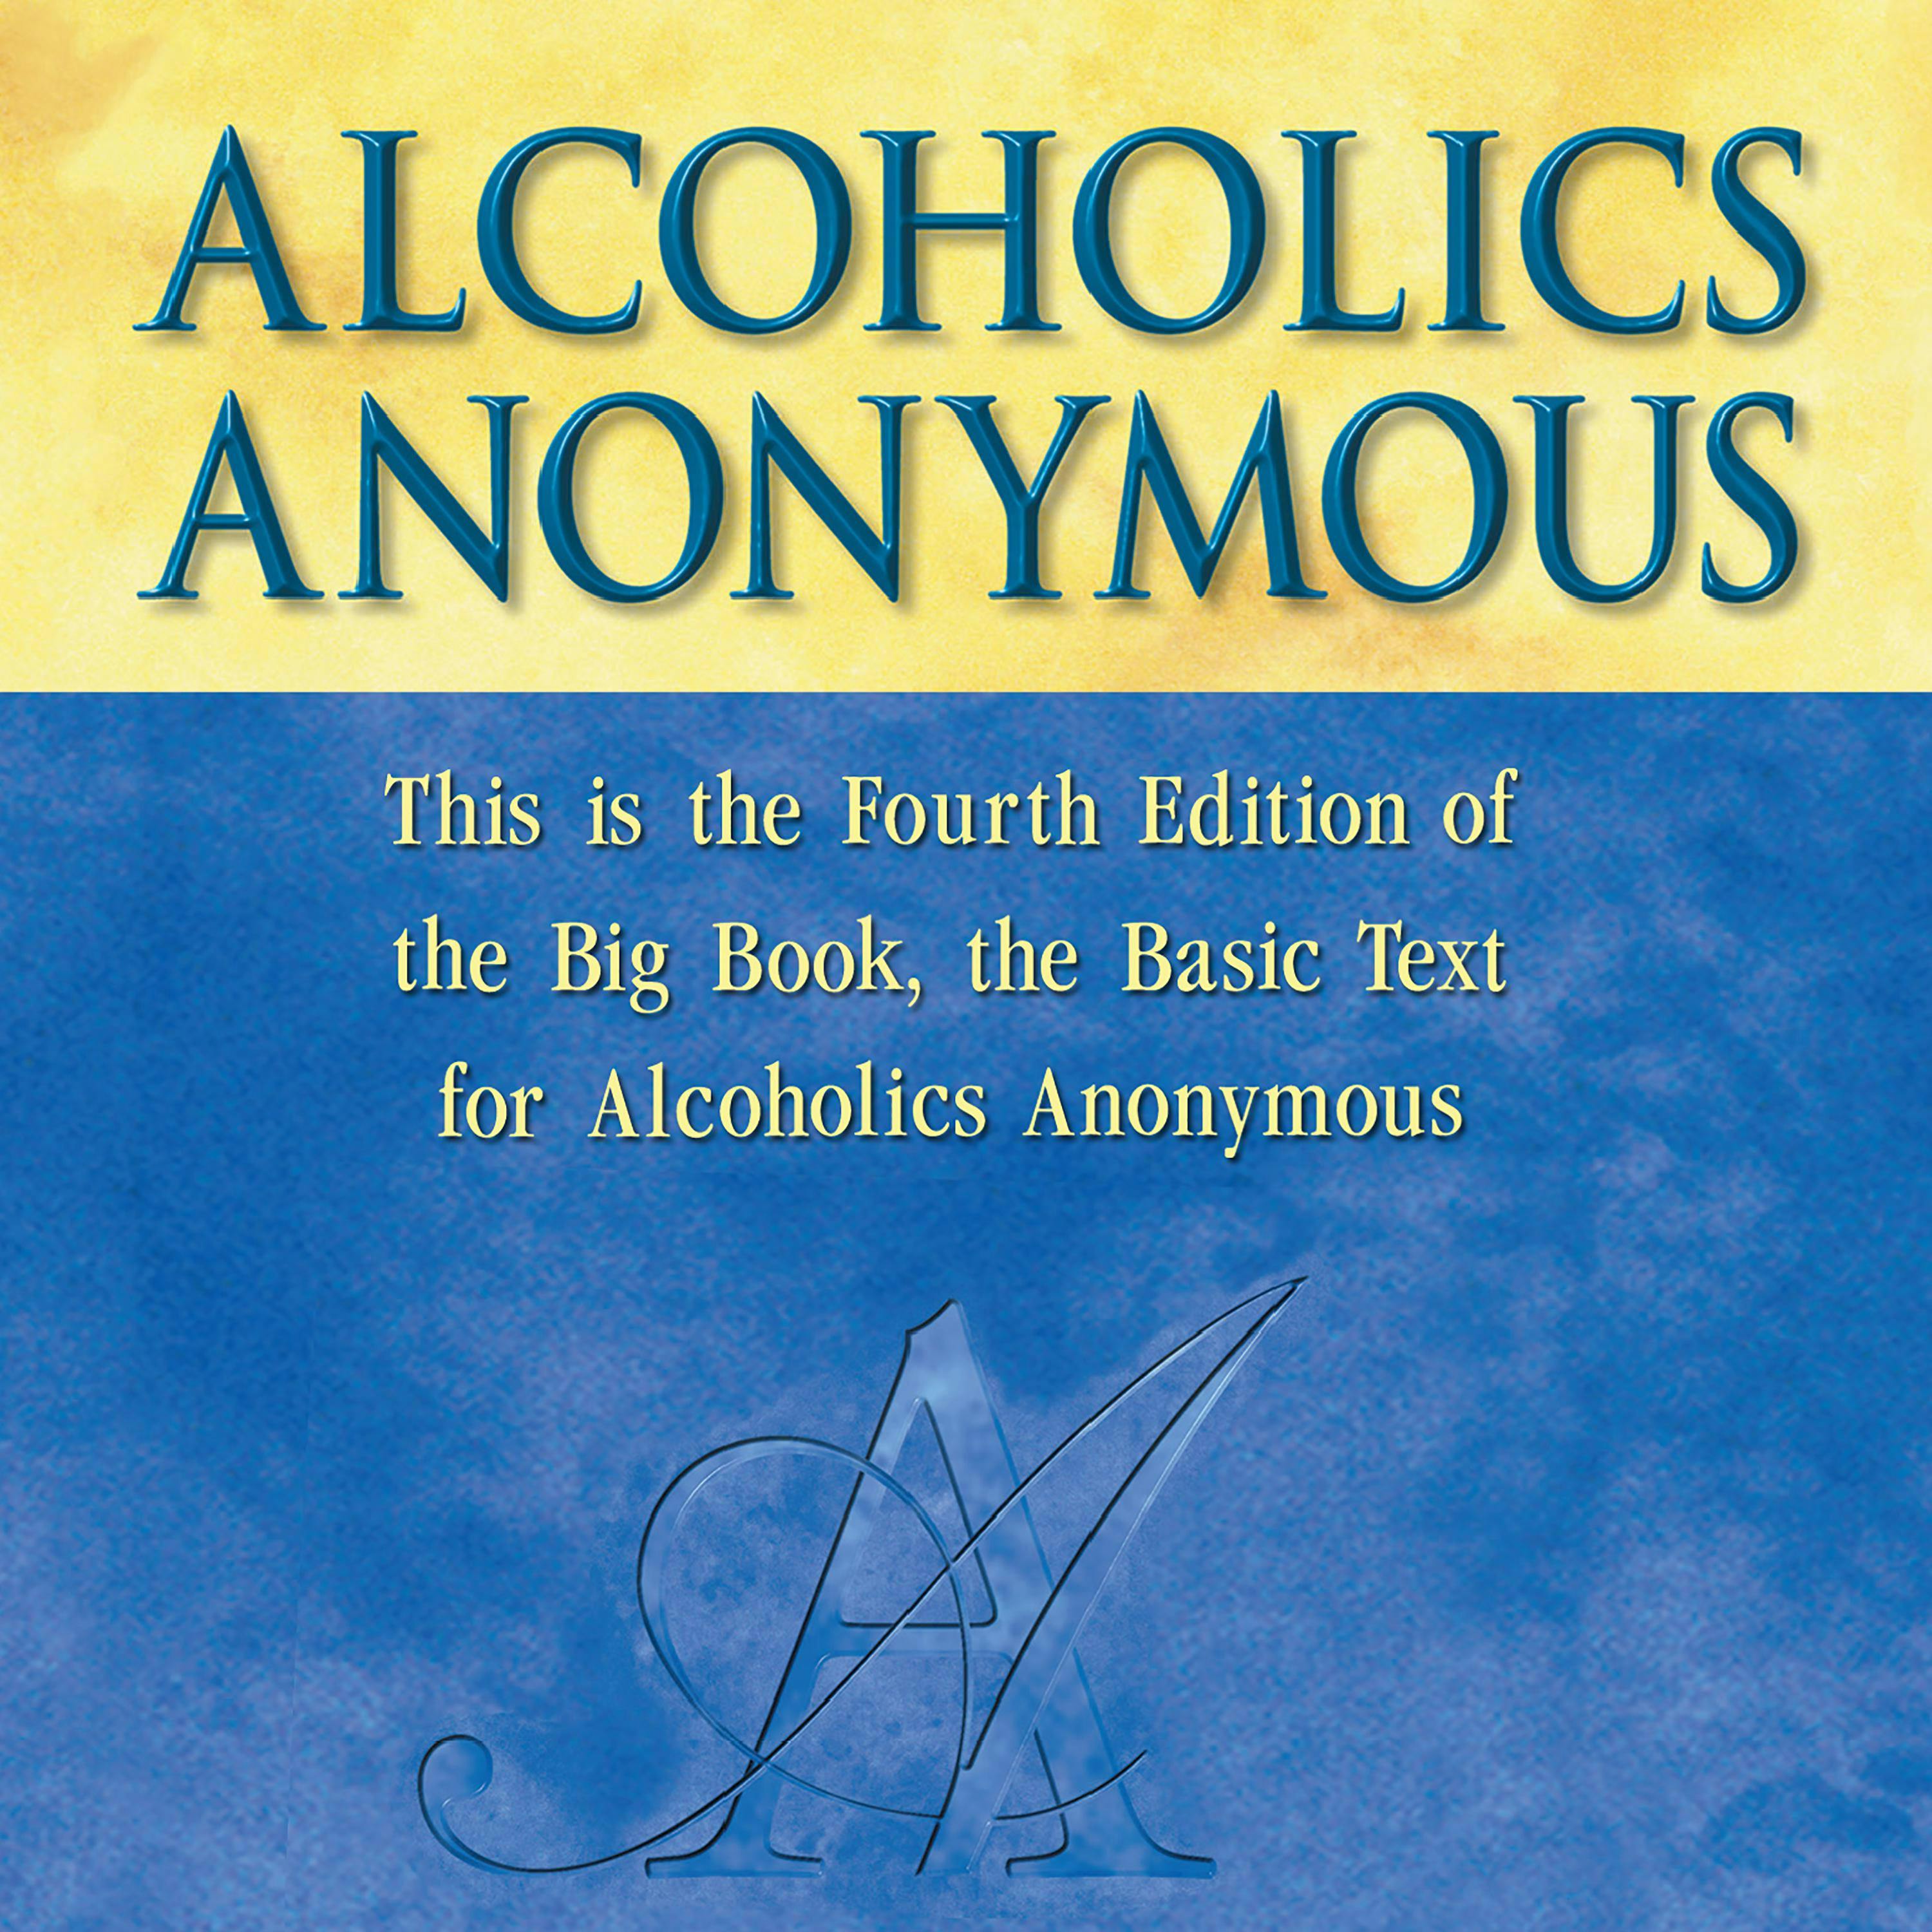 Alcoholics Anonymous, Fourth Edition: The official "Big Book" from Alcoholic Anonymous - undefined